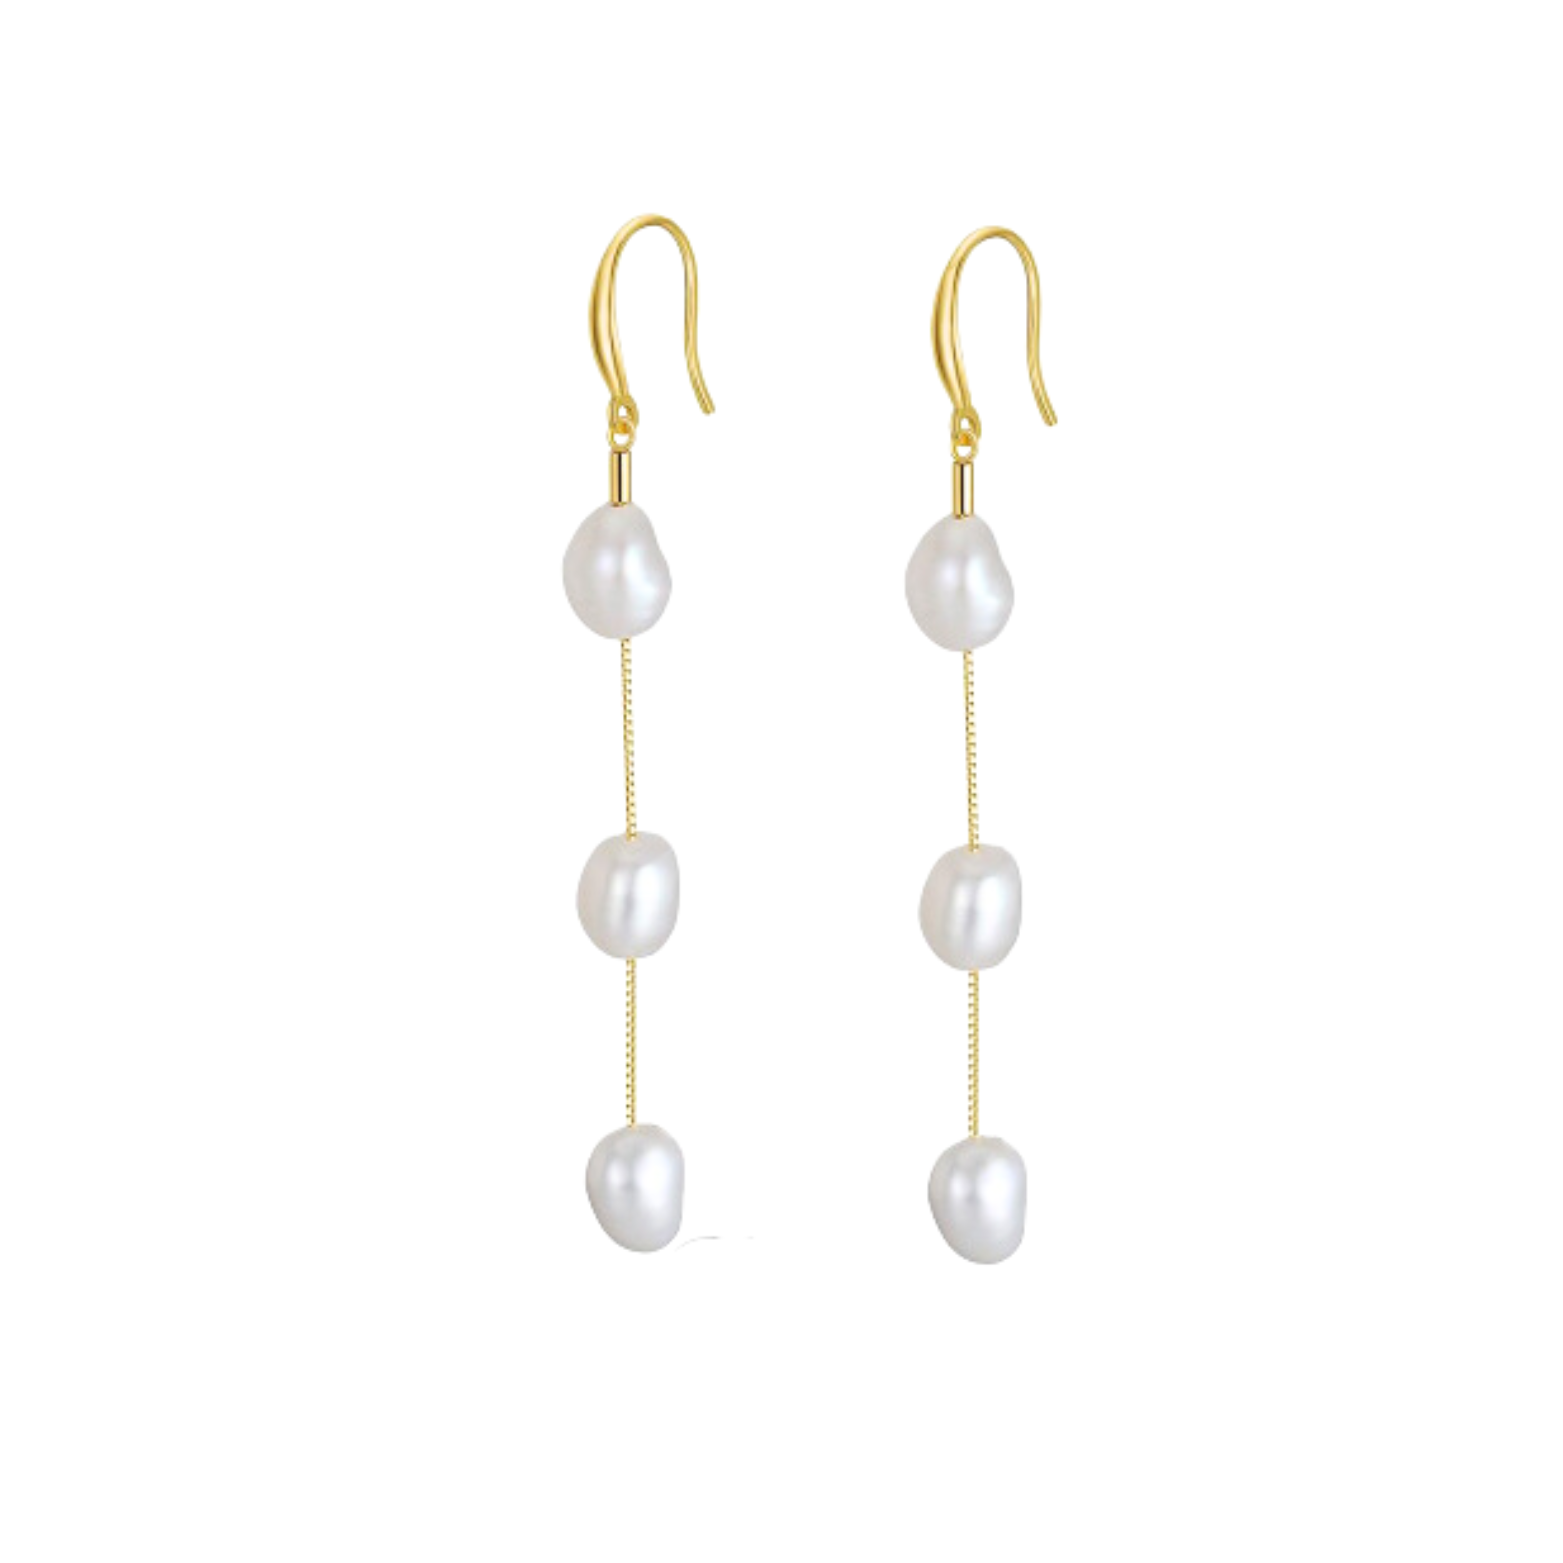 Ivory Pearl Earrings with 14K Gold Plating on display